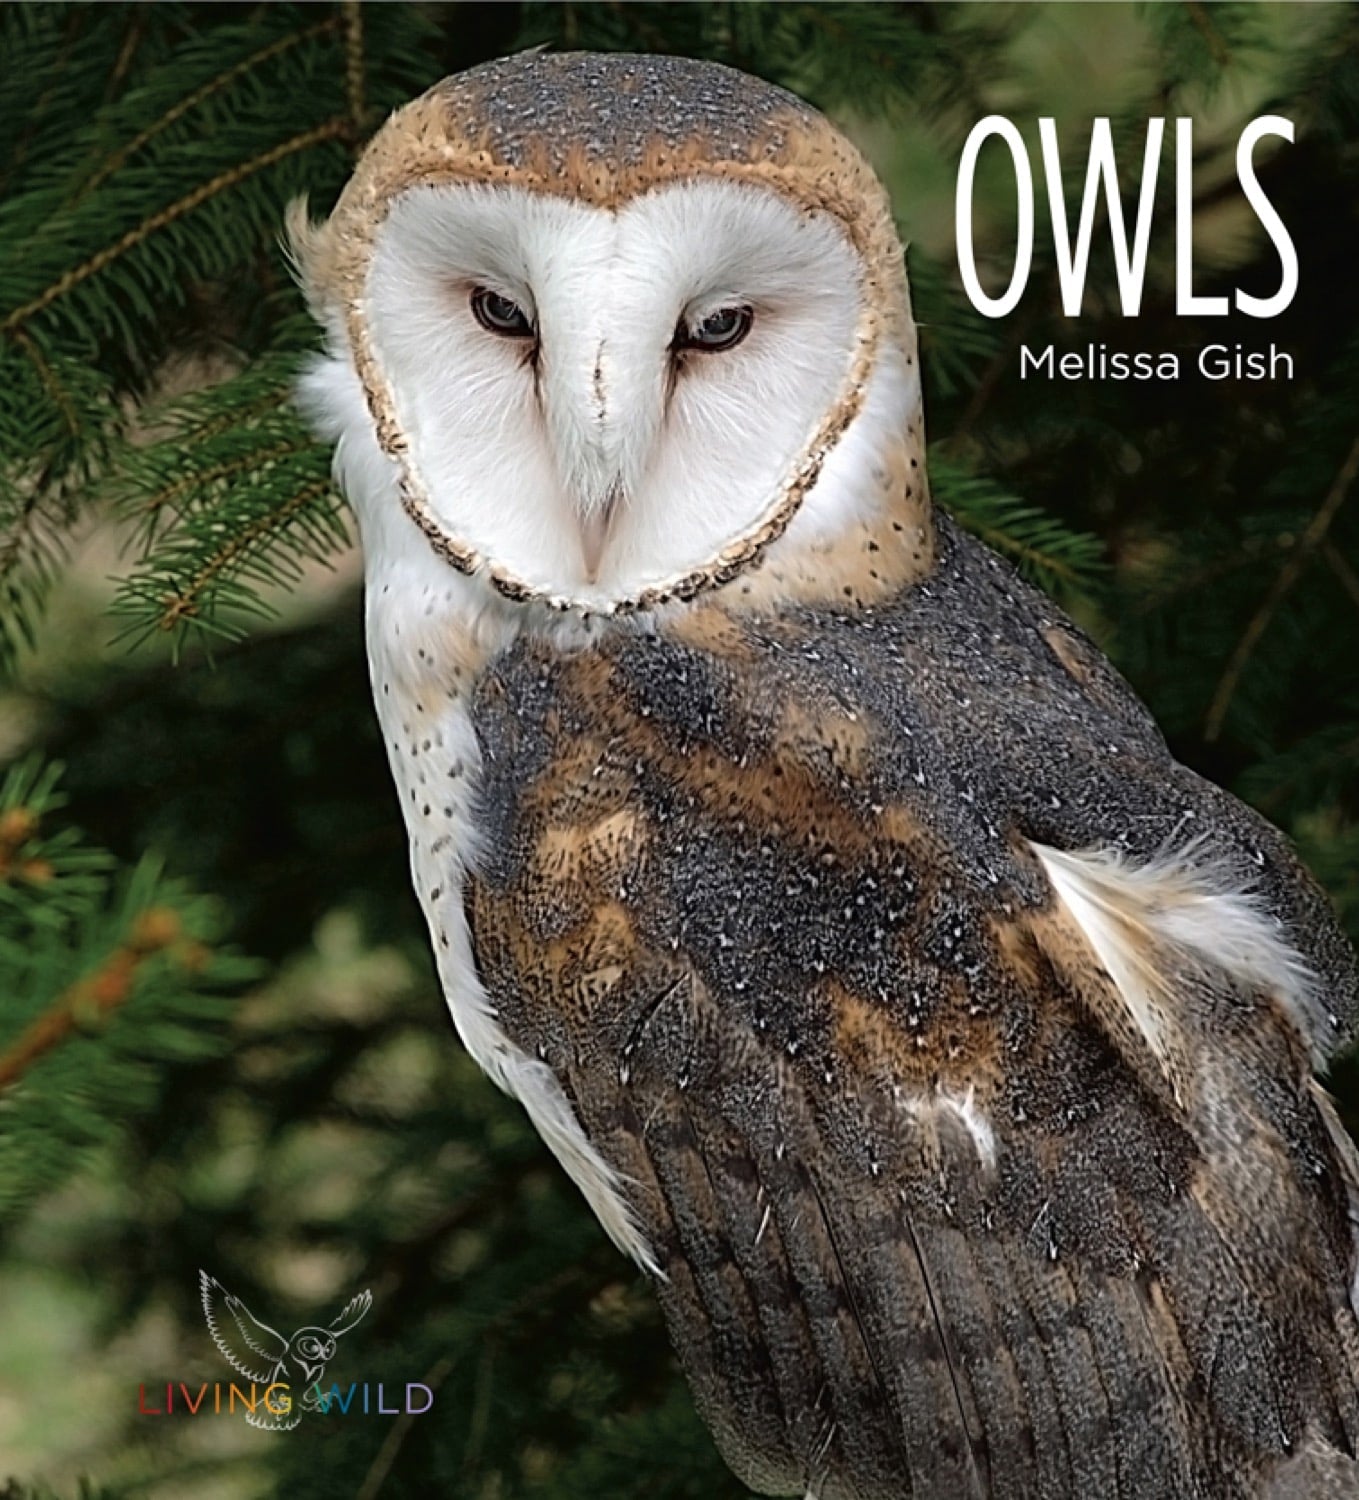 Living Wild - Classic Edition: Owls